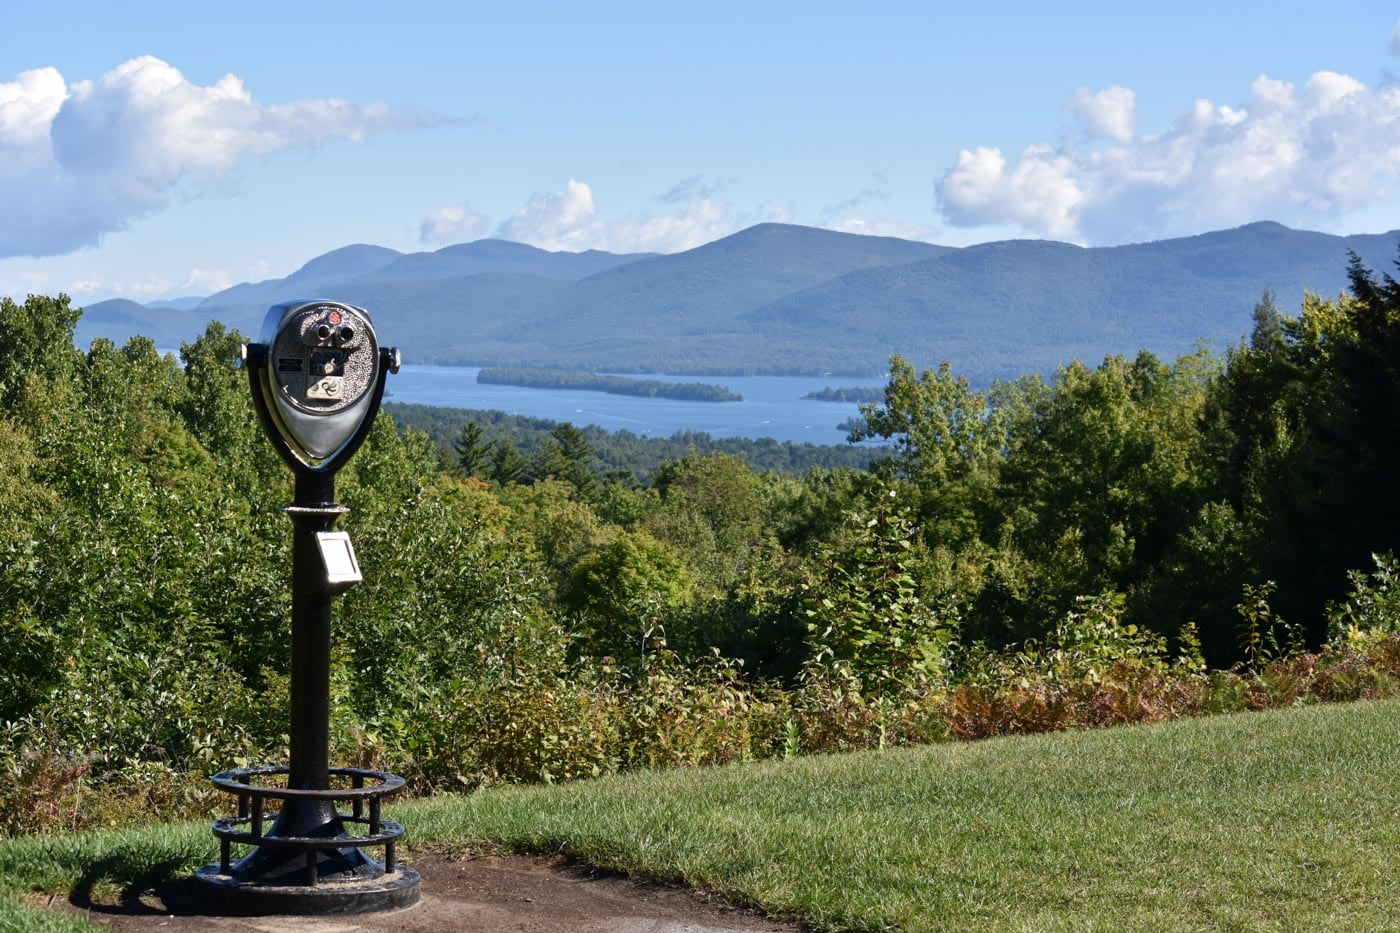 a parking meter on a hill overlooking a lake